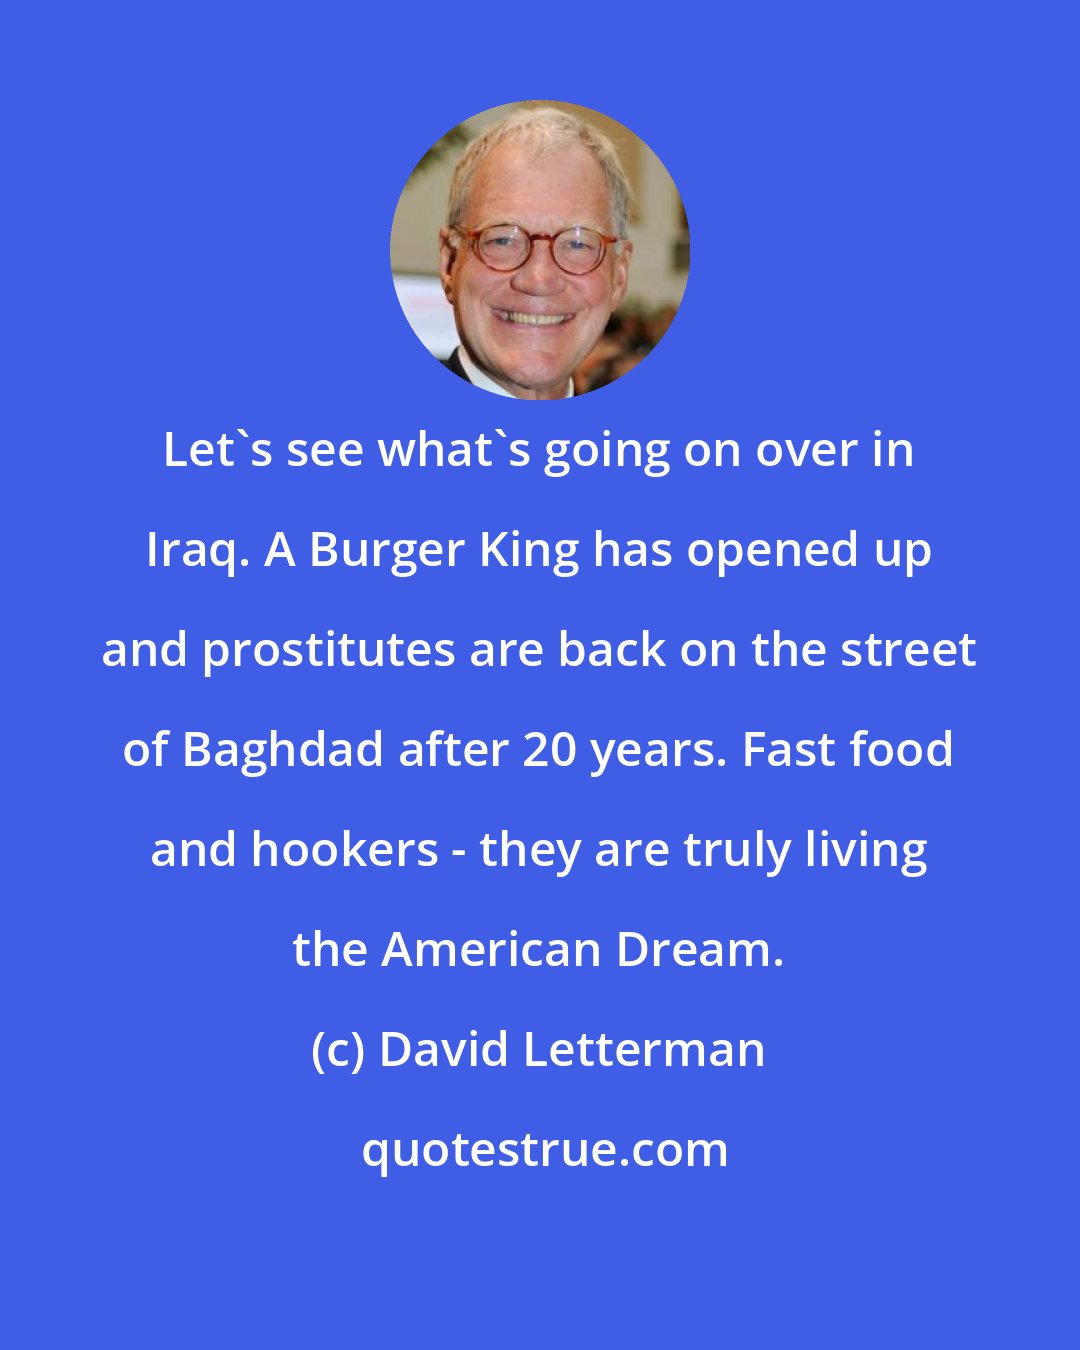 David Letterman: Let's see what's going on over in Iraq. A Burger King has opened up and prostitutes are back on the street of Baghdad after 20 years. Fast food and hookers - they are truly living the American Dream.